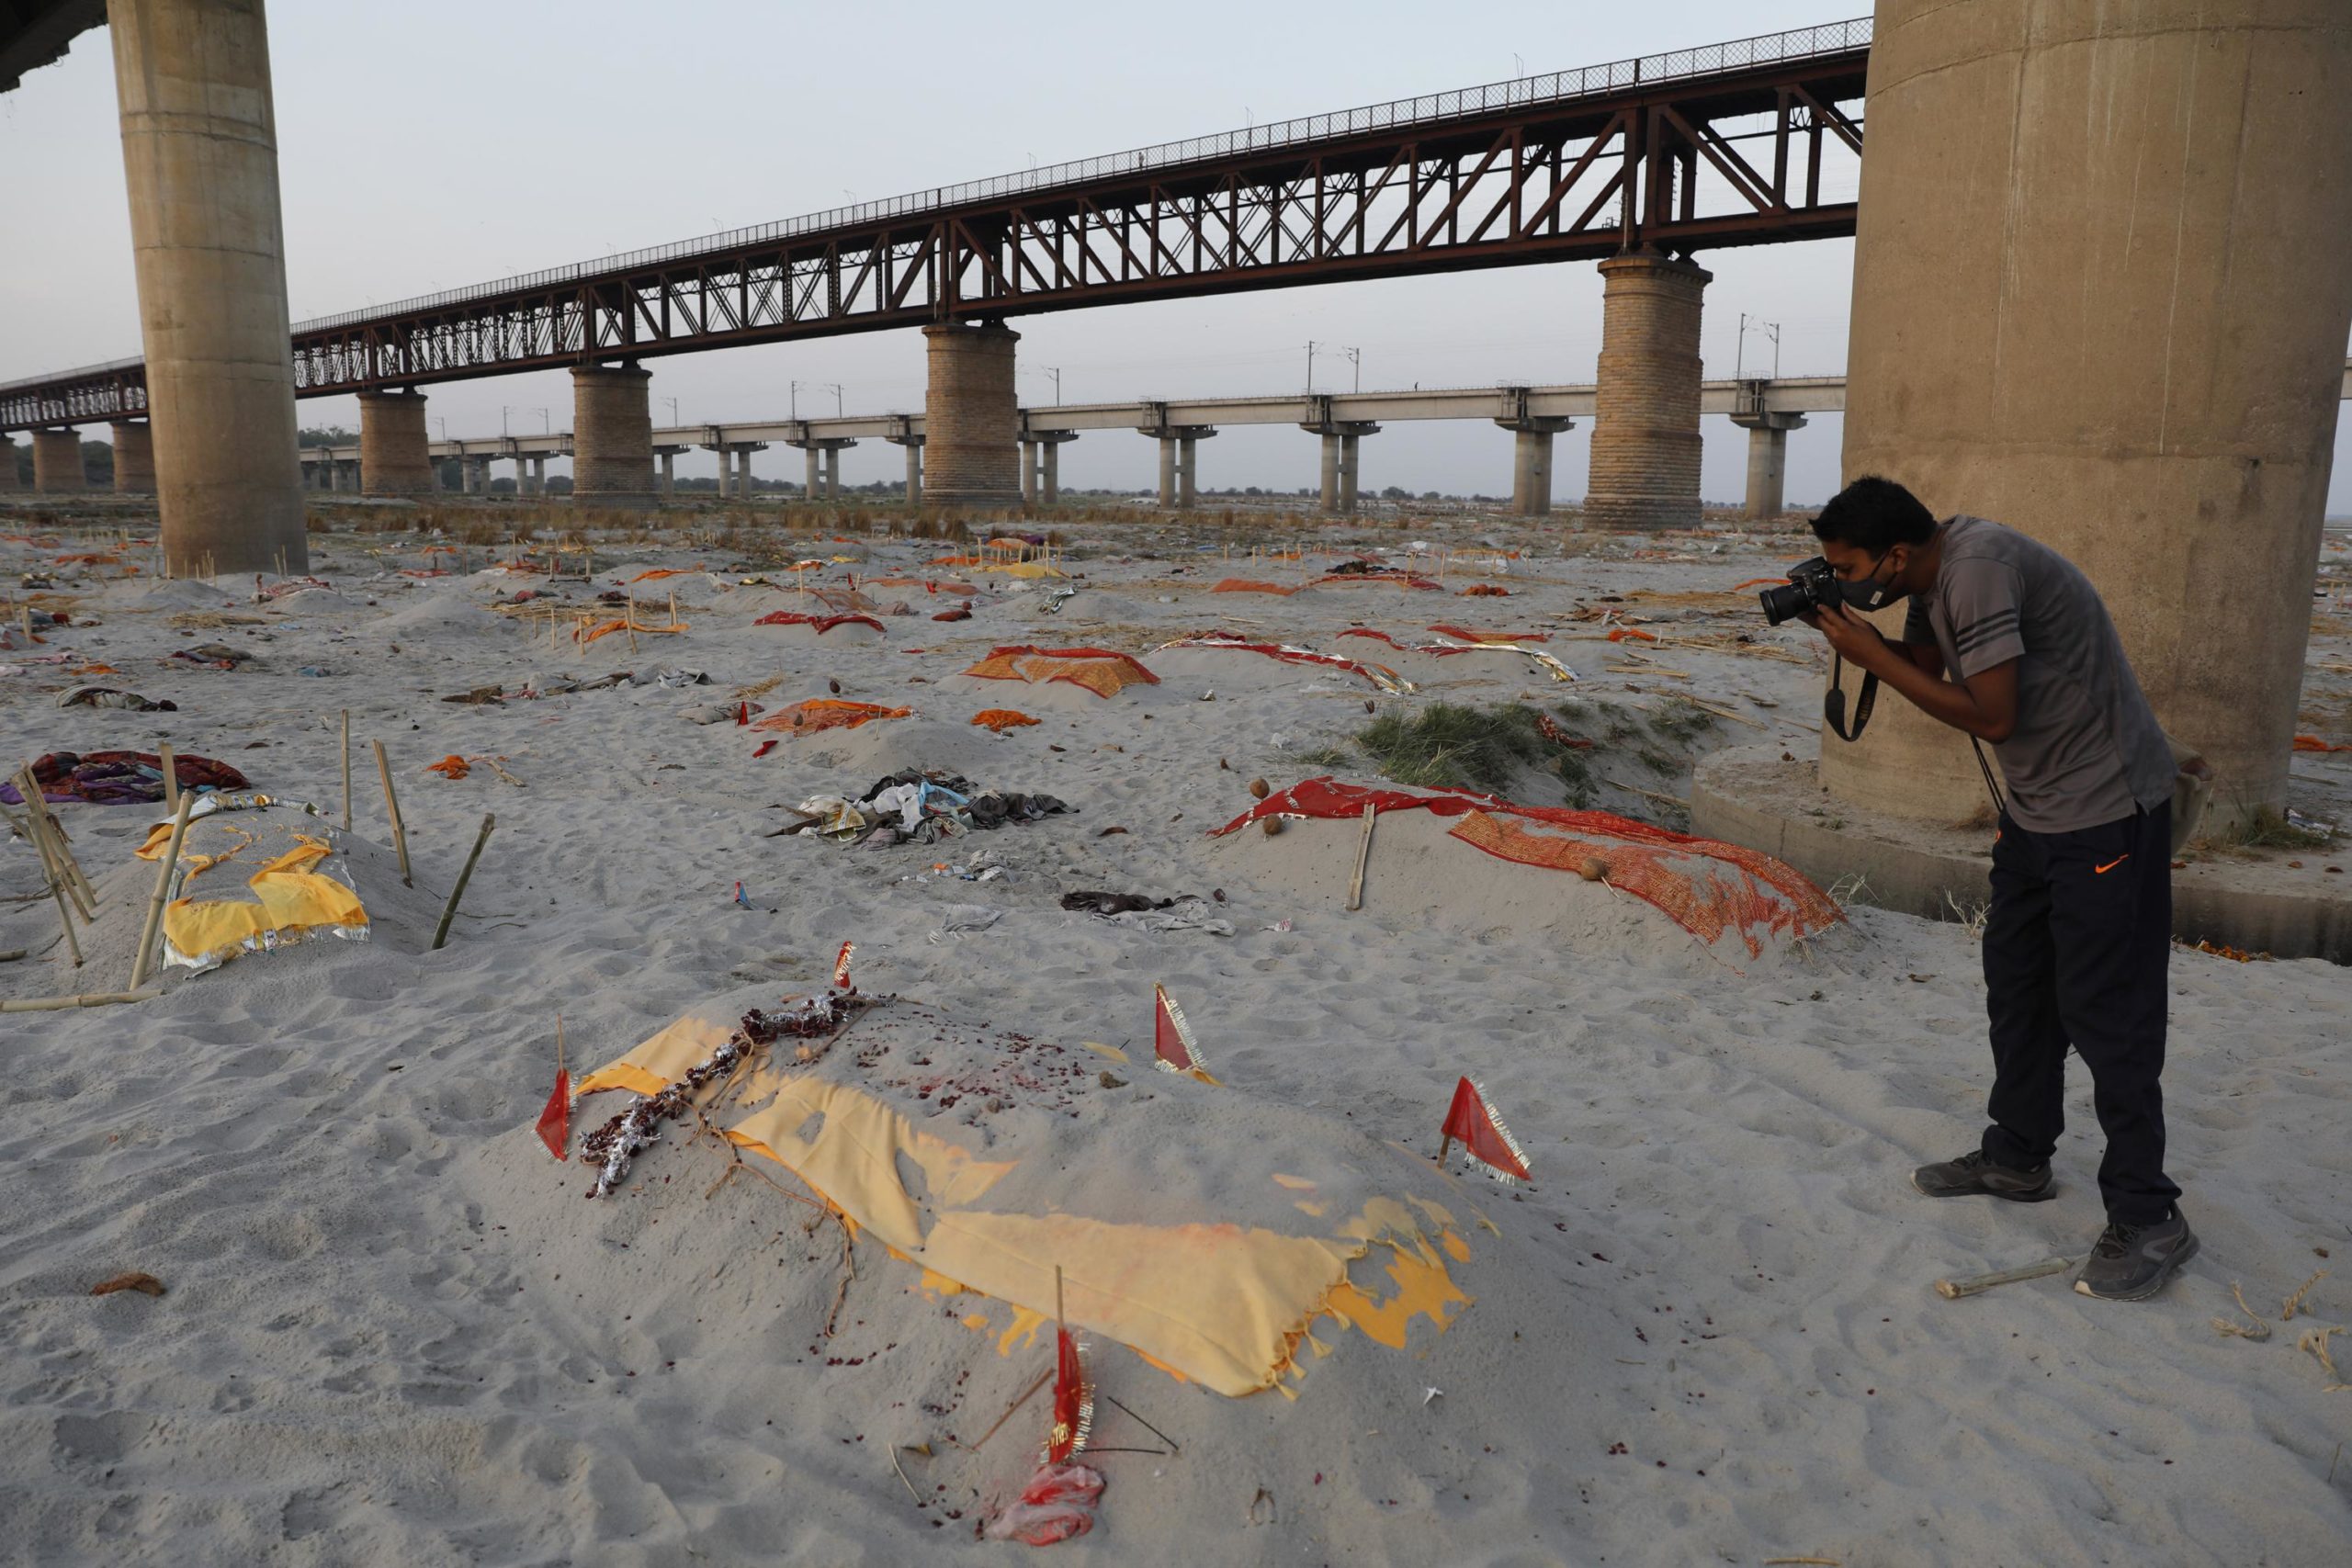 Anxiety As Ganges Exposes India’s Covid-19 Graves